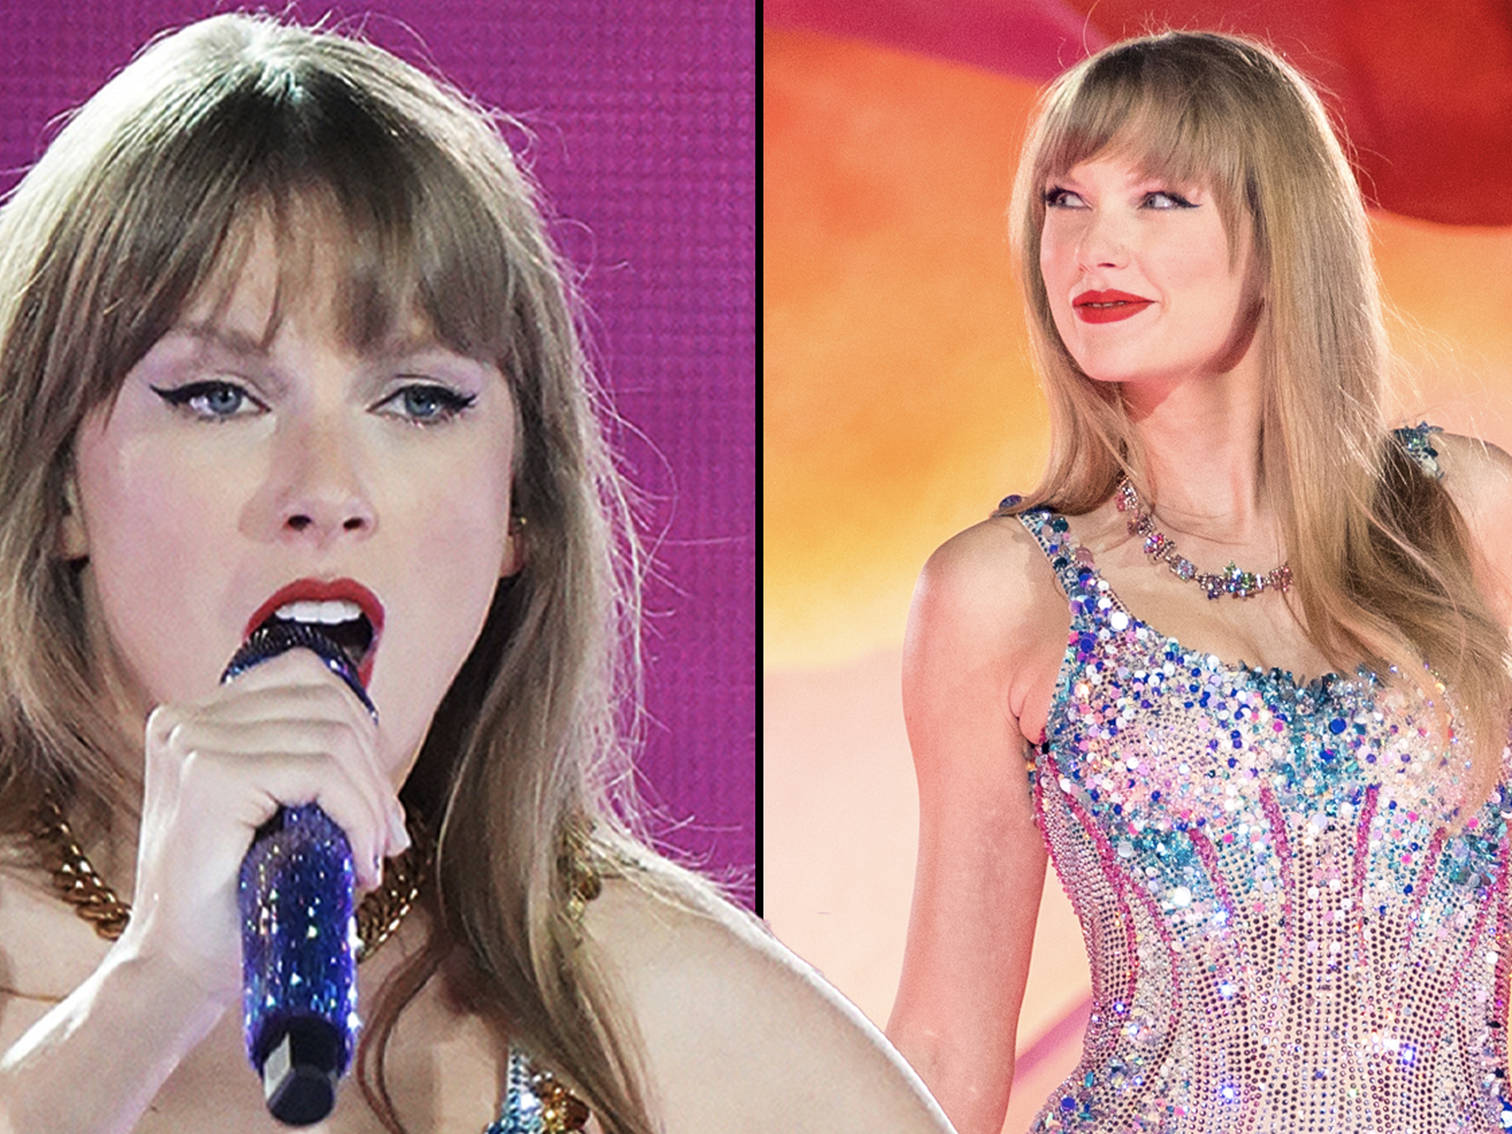 Taylor Swift's End Game Lyrics Are Here And They're Epic